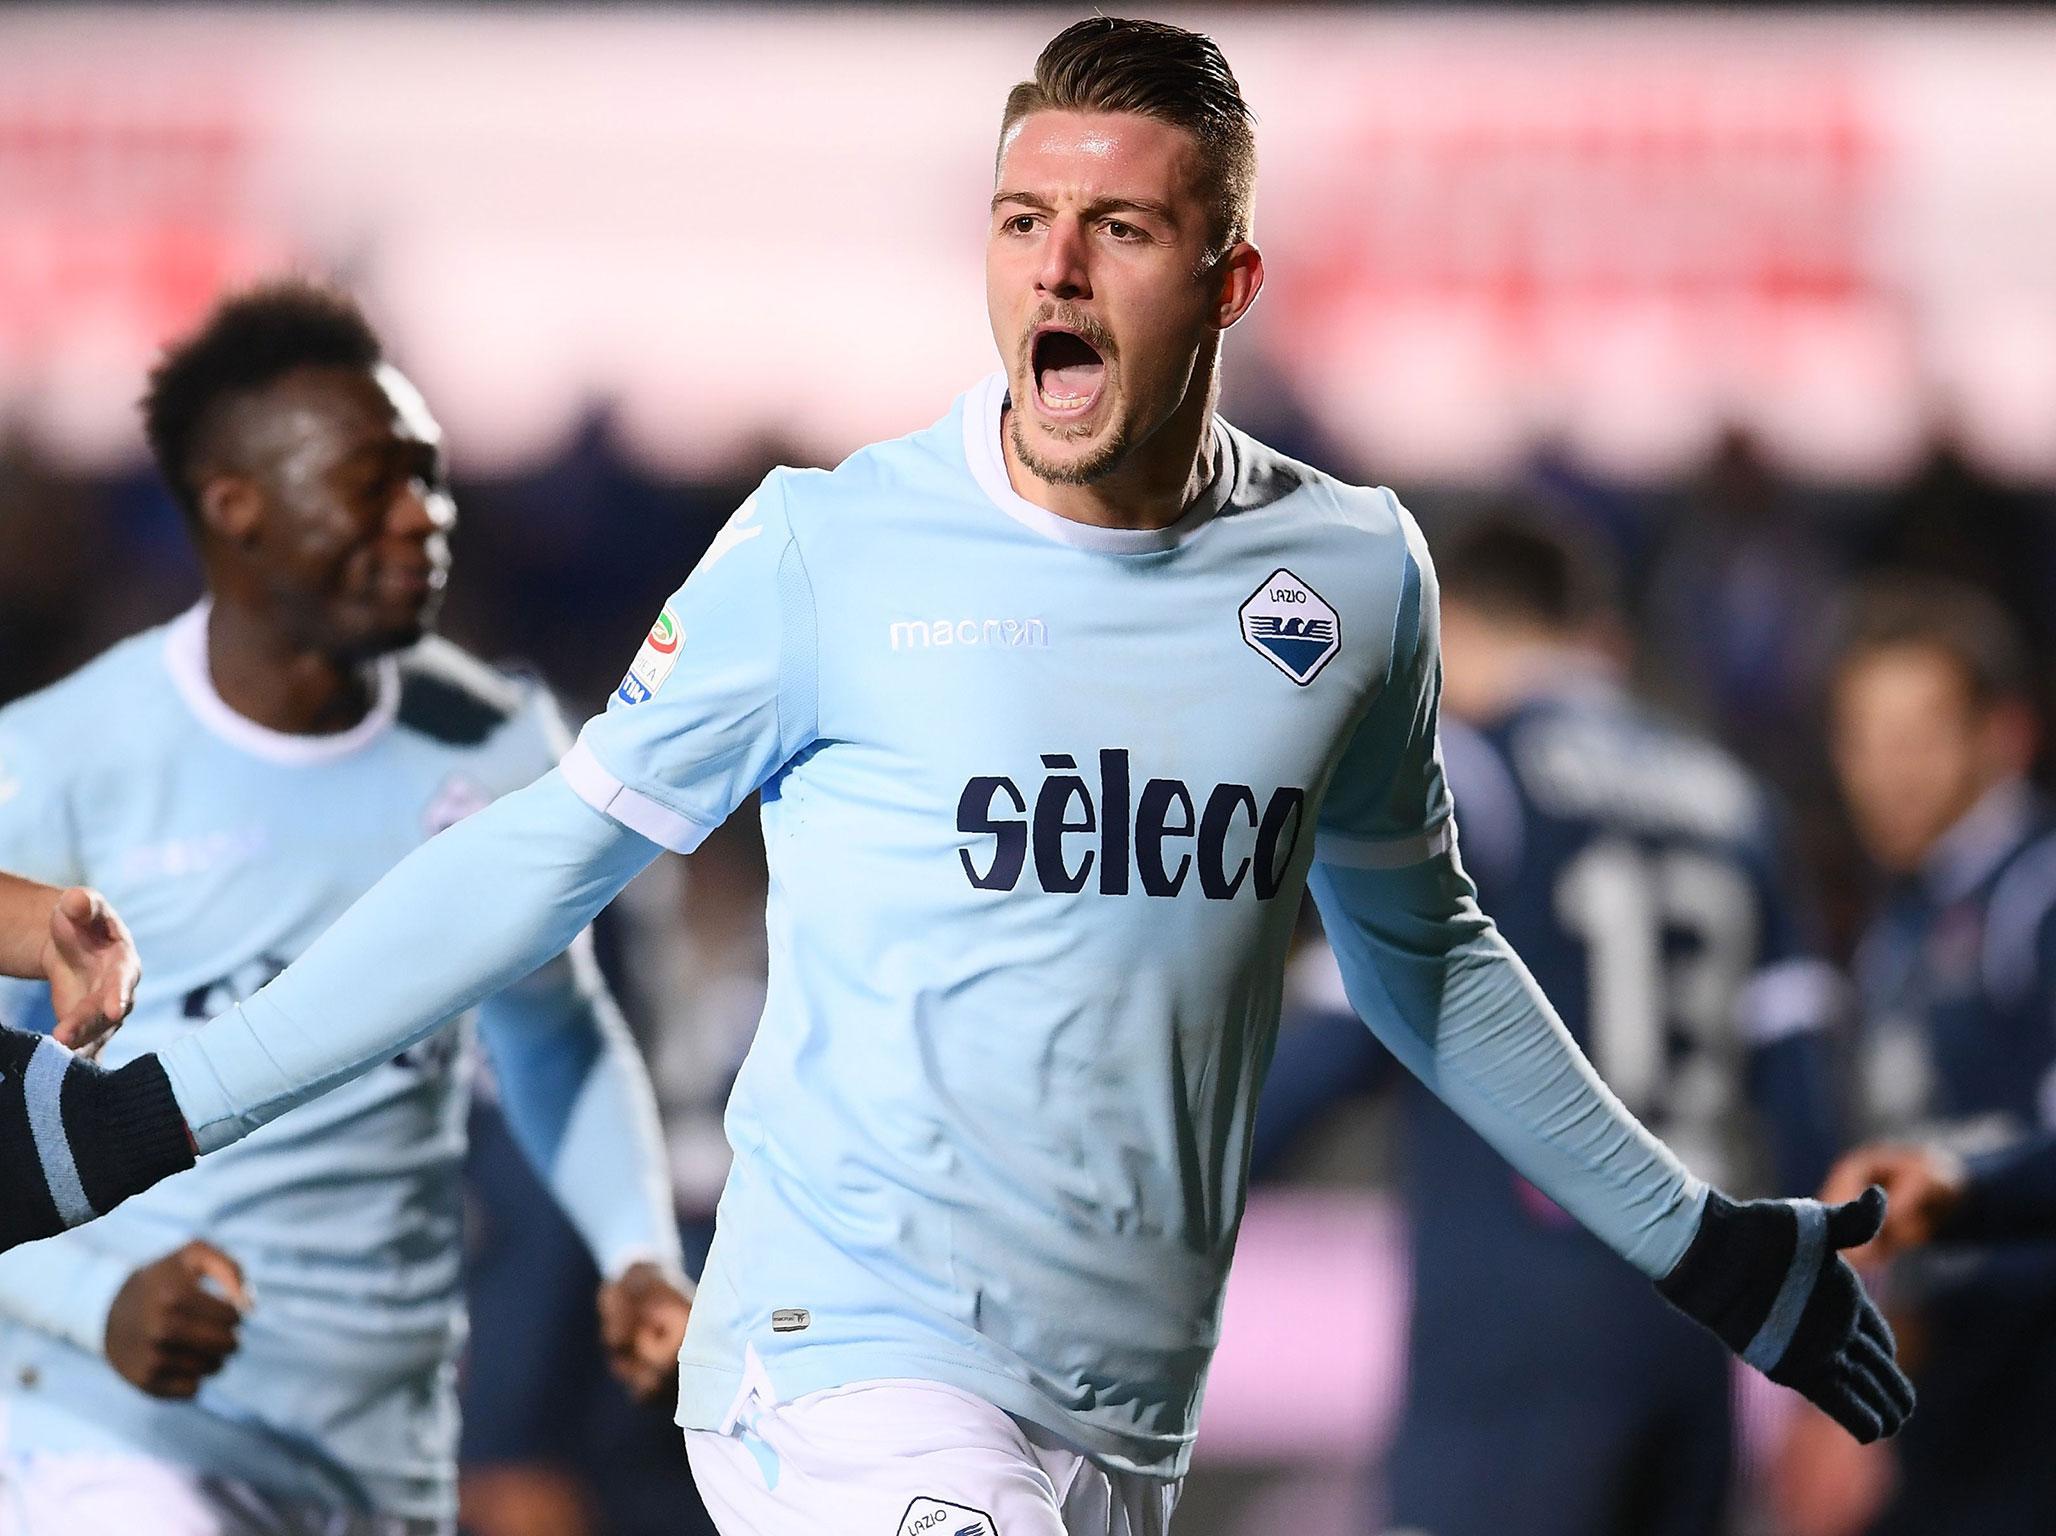 Milinkovic-Savic is one of the most sought after midfielders in Europe